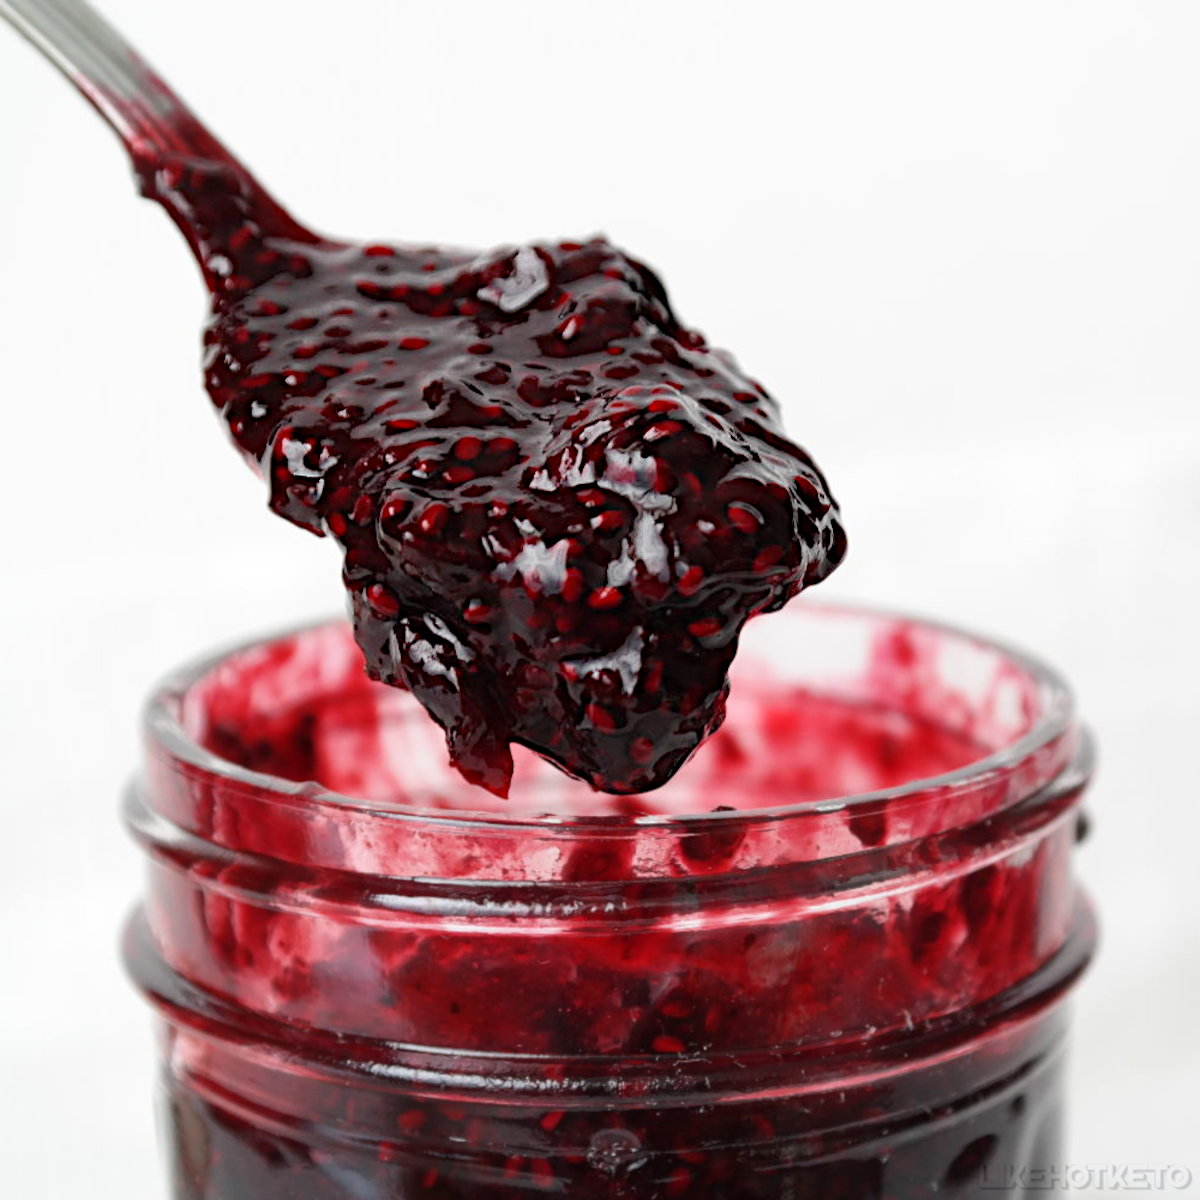 A spoonful of sugar-free chia seed berry jam.